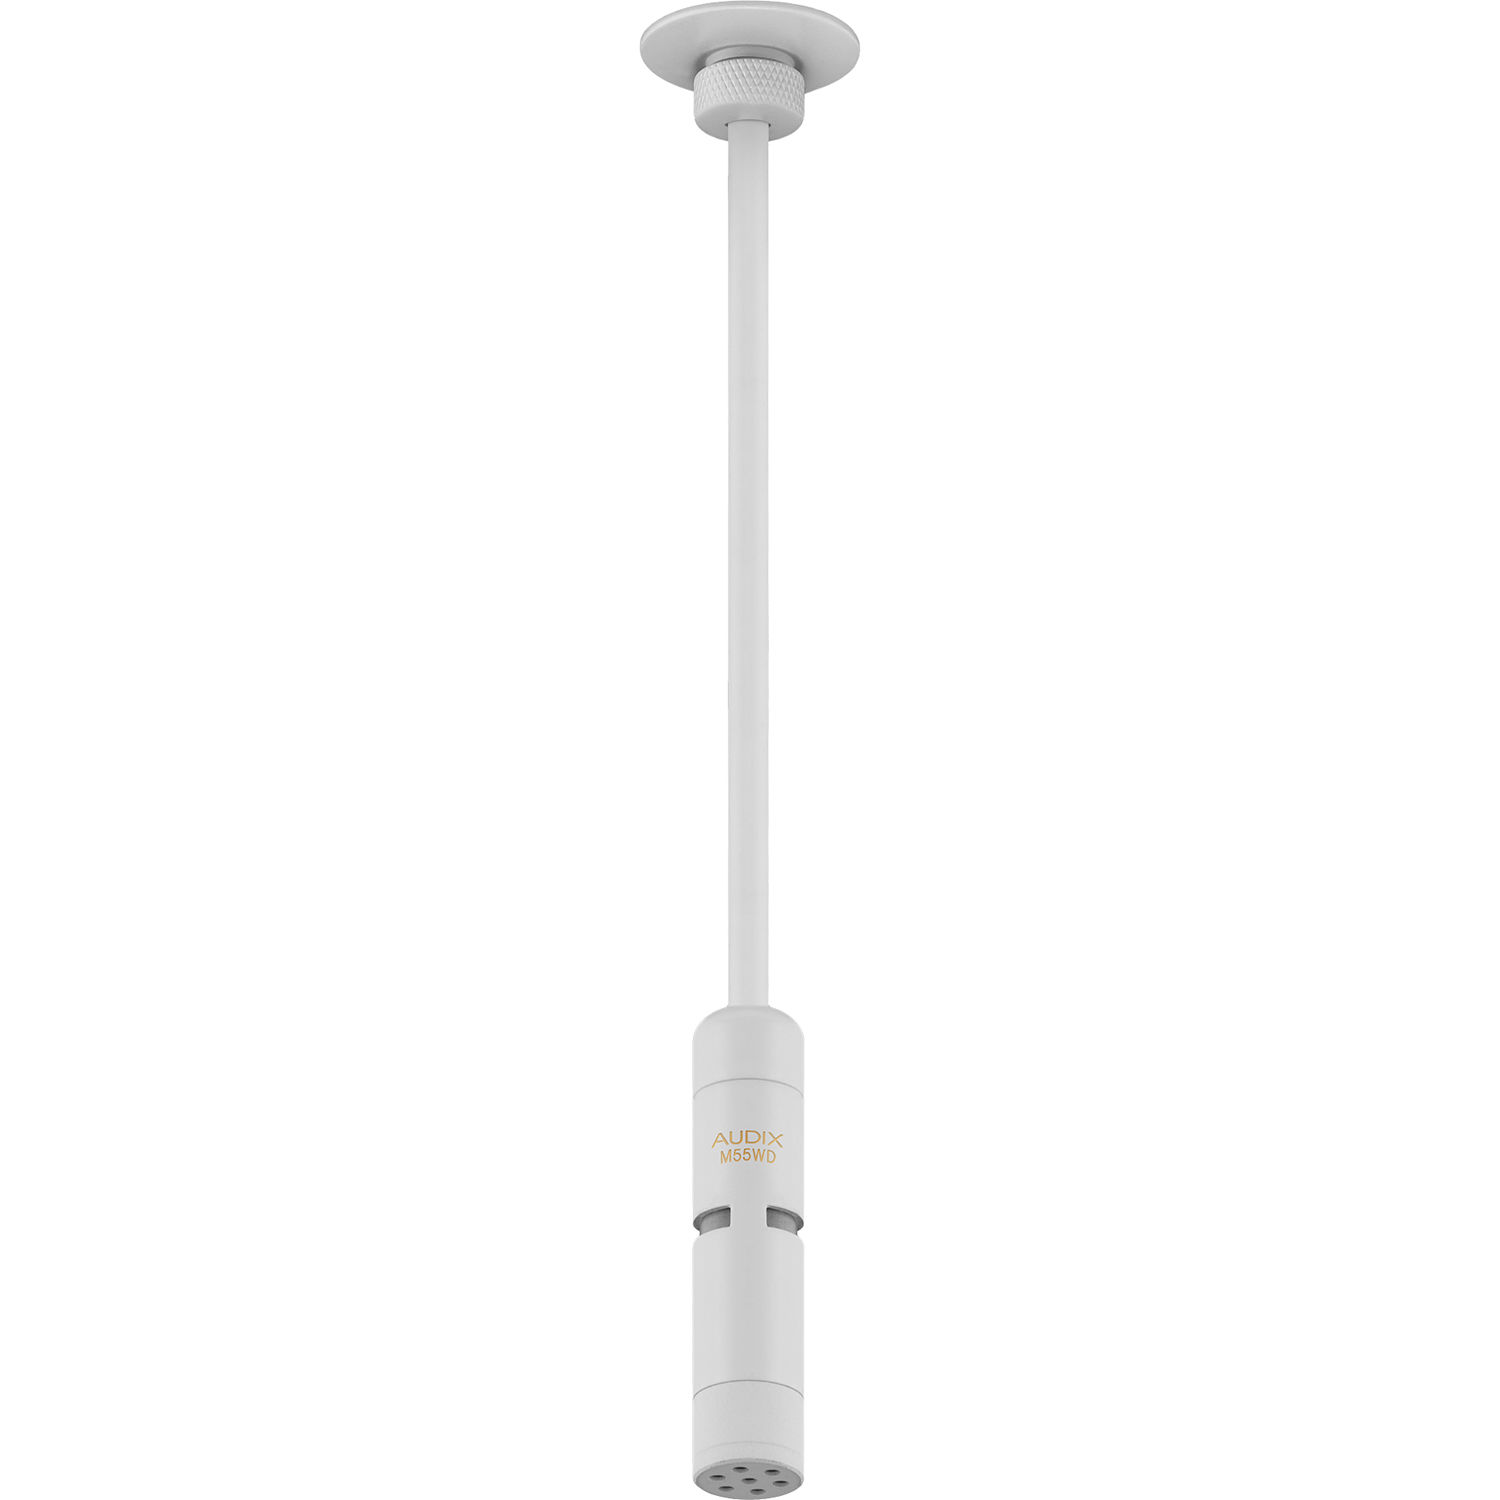 Audix M55wd Hanging Ceiling Microphone